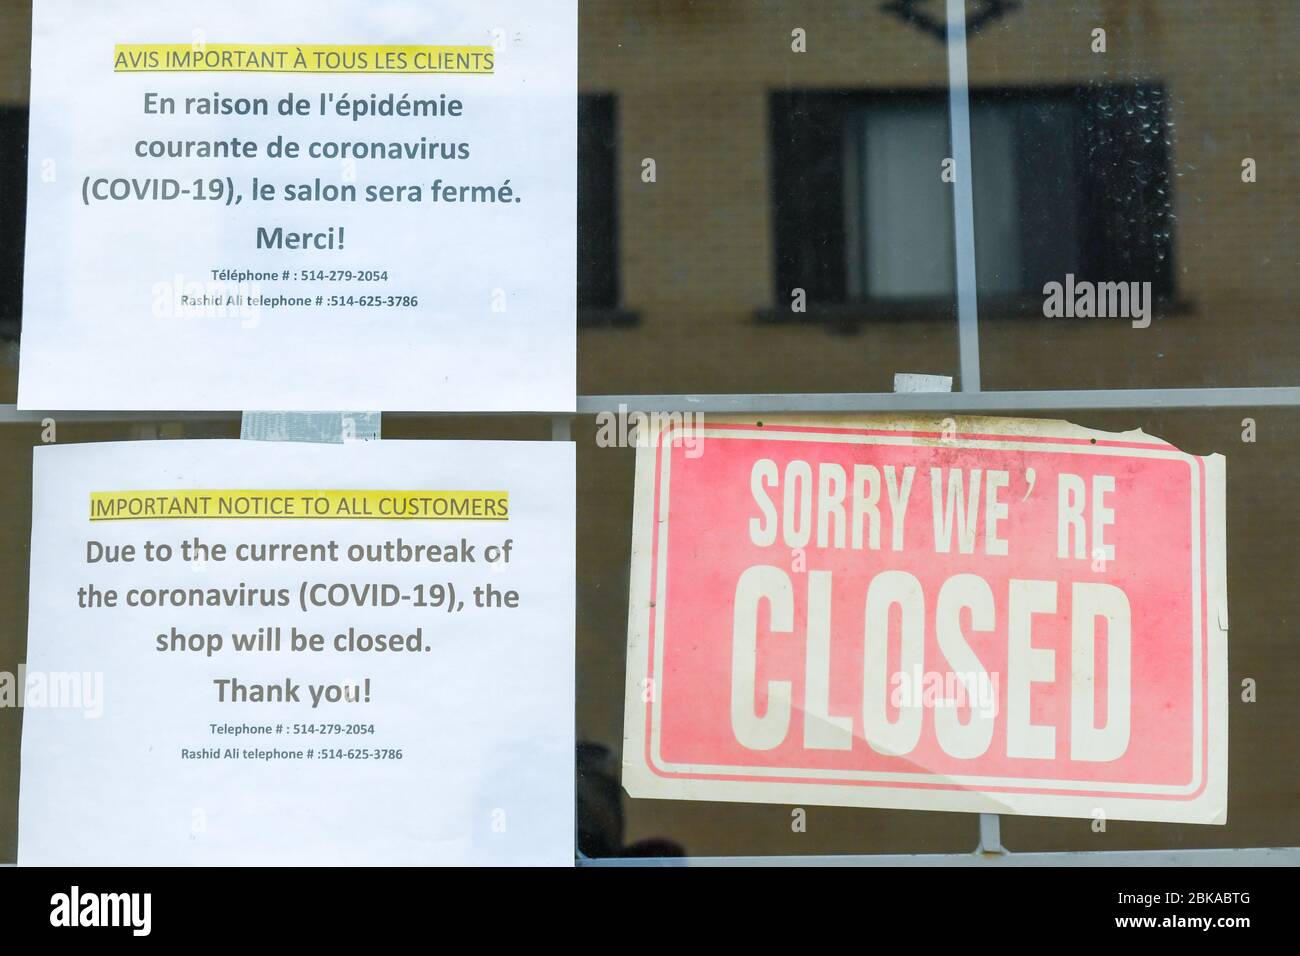 Closed Business, Covid 19 Pandemic, Montreal Stockfoto